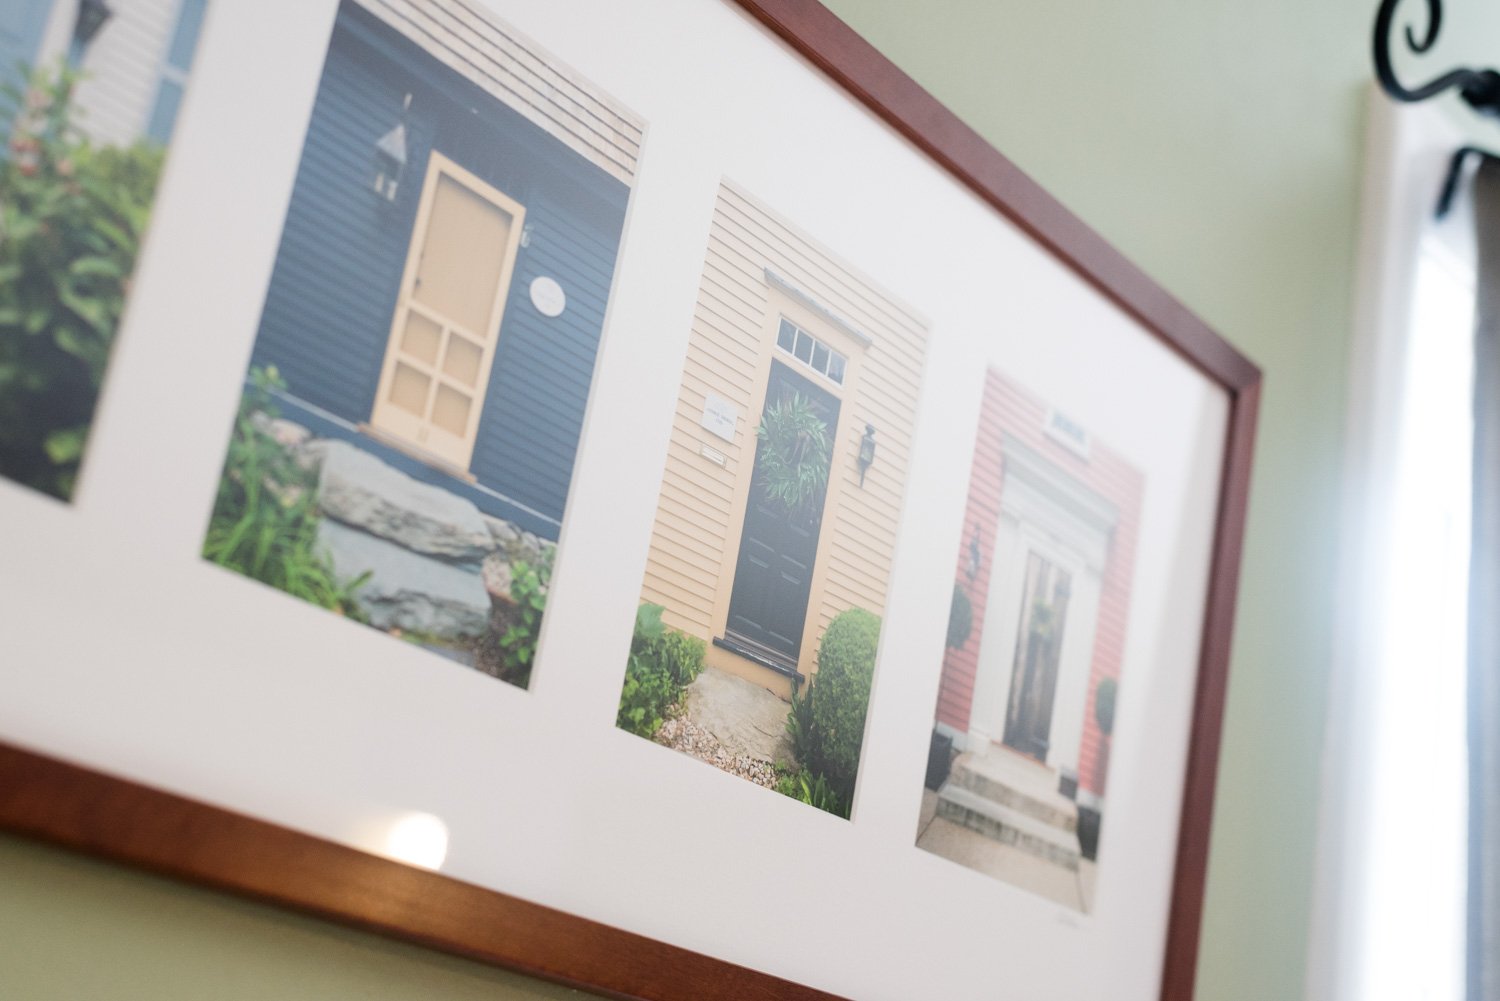 Cate Brown Photo Wickford Doors in Summer #1 // Framed Fine Art Collage 13x30" // Open Edition Available Inventory Ocean Fine Art